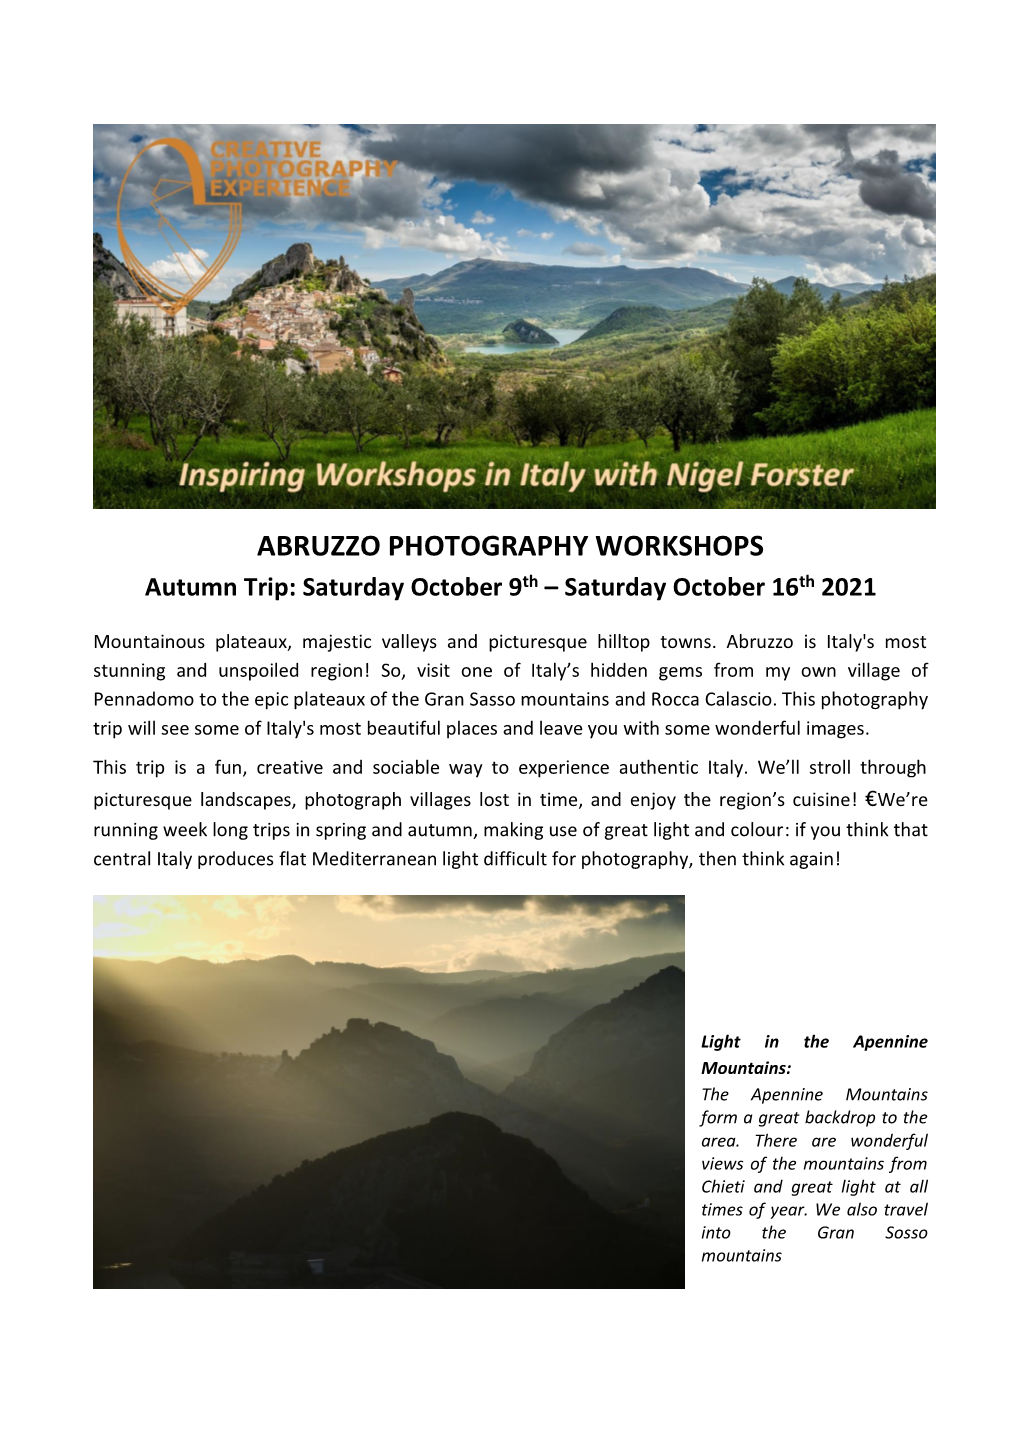 ABRUZZO PHOTOGRAPHY WORKSHOPS Autumn Trip: Saturday October 9Th – Saturday October 16Th 2021